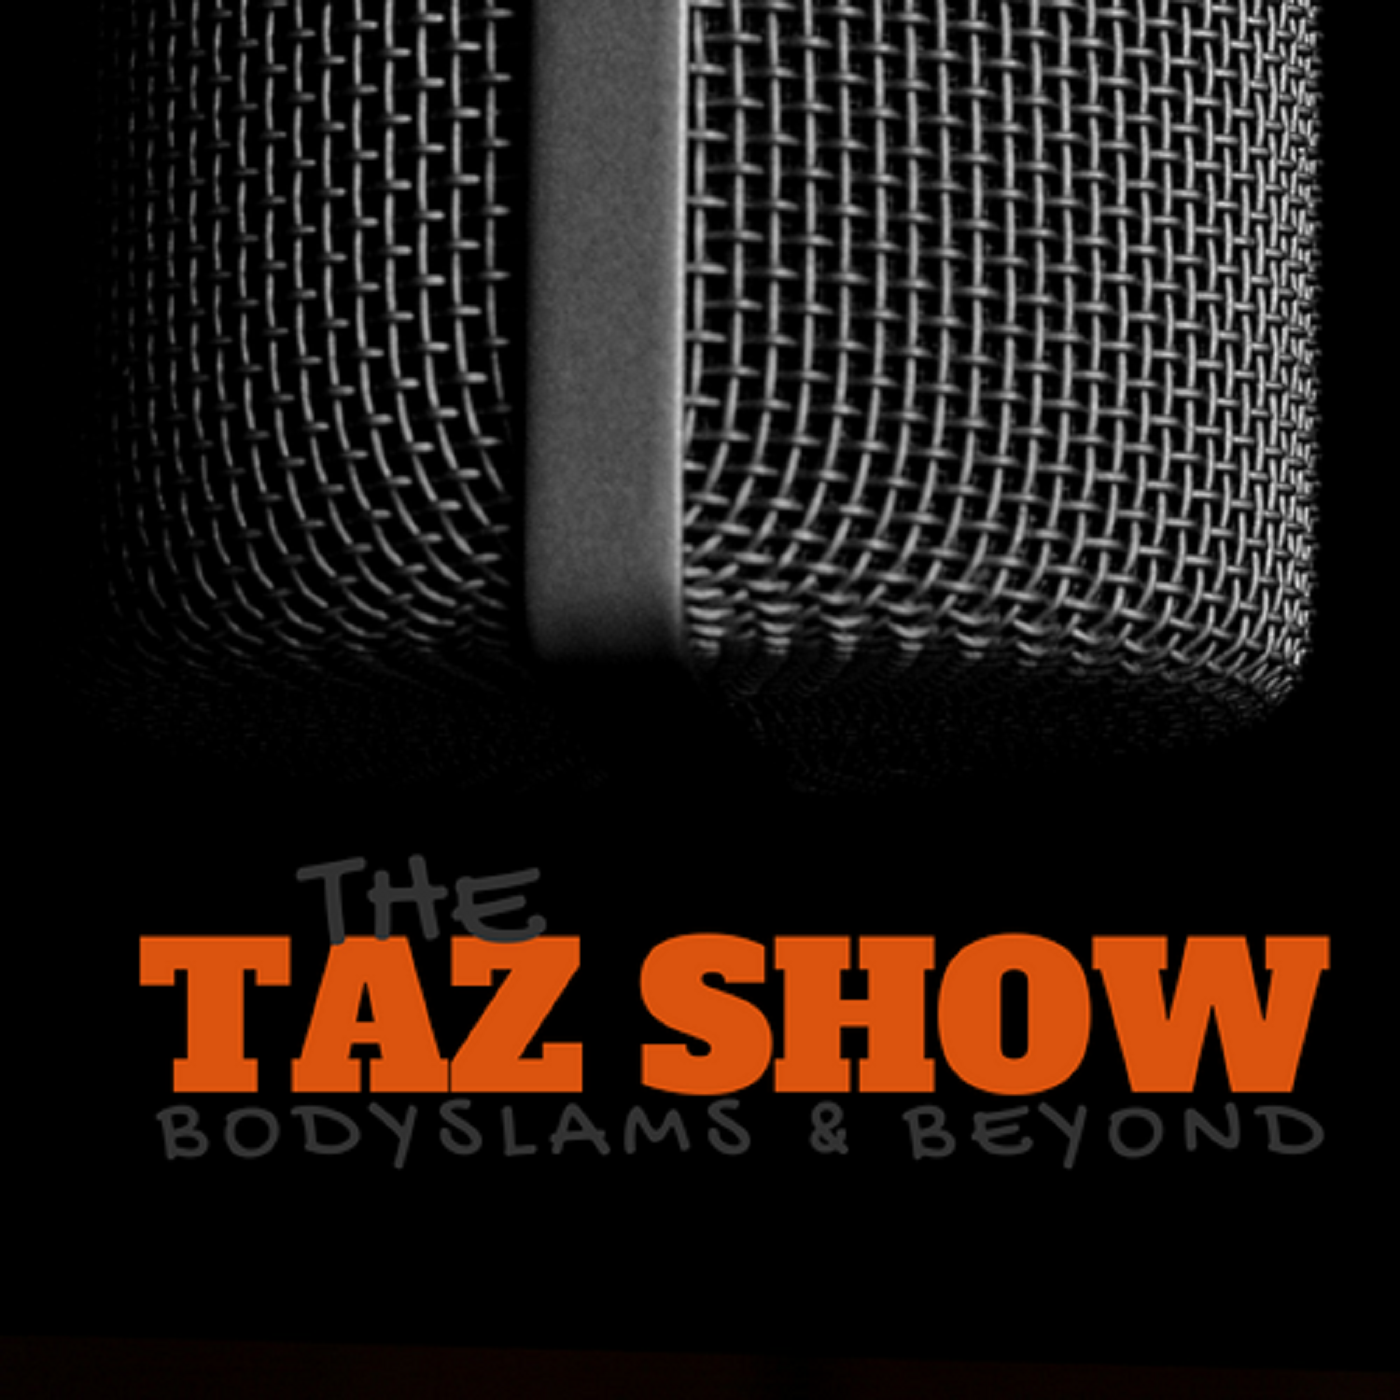 The Taz Show Day 4!